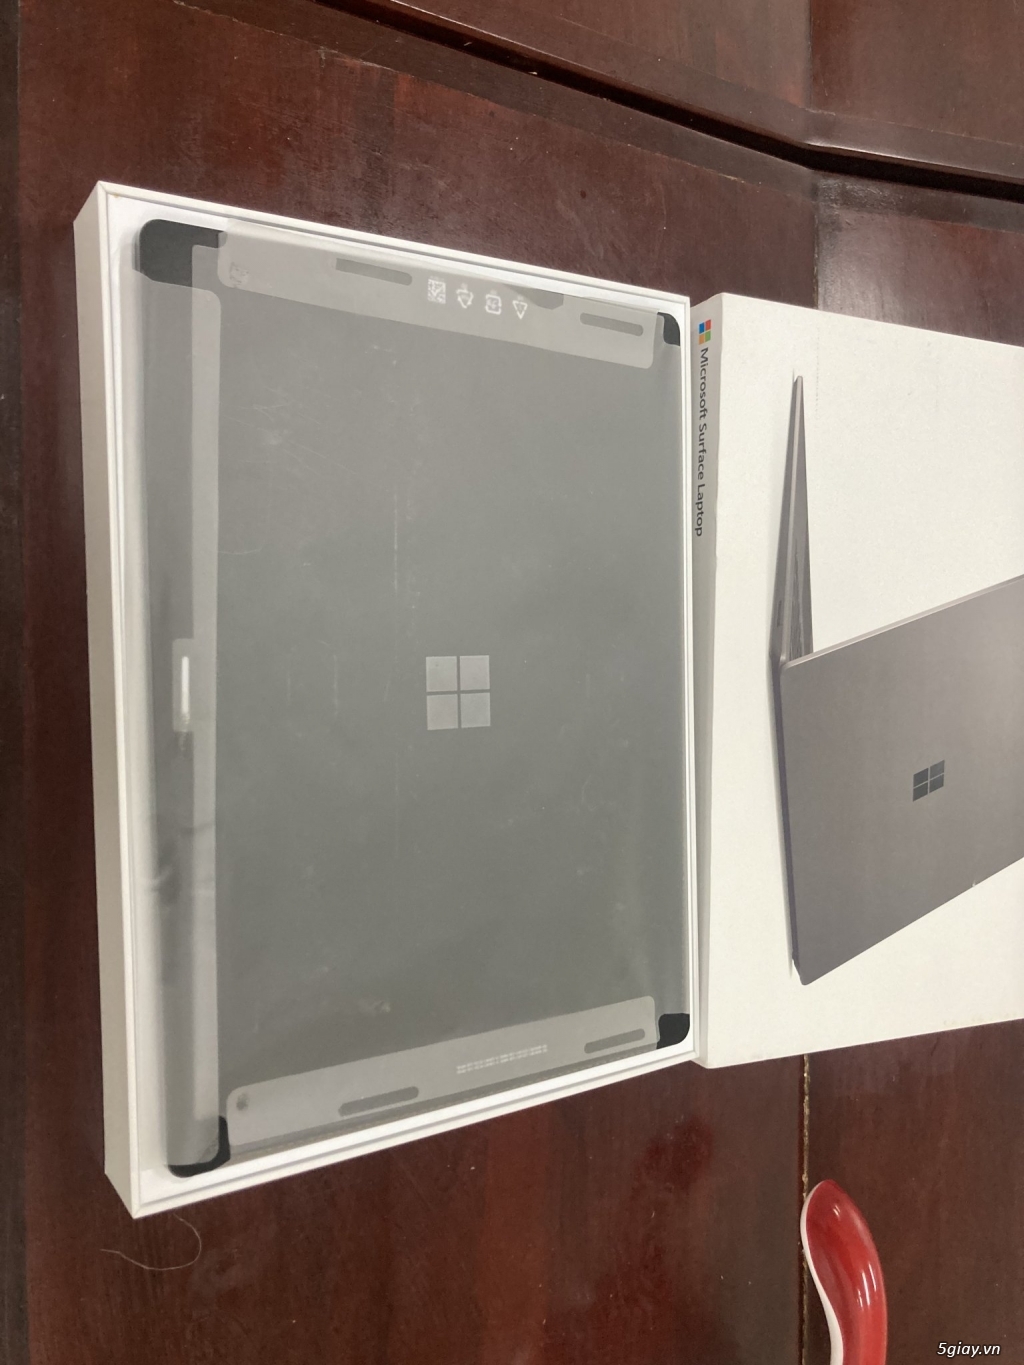 surface laptop 13 & 15in option cao i7 gen 10 16gb giá rẻ hàng new - 4